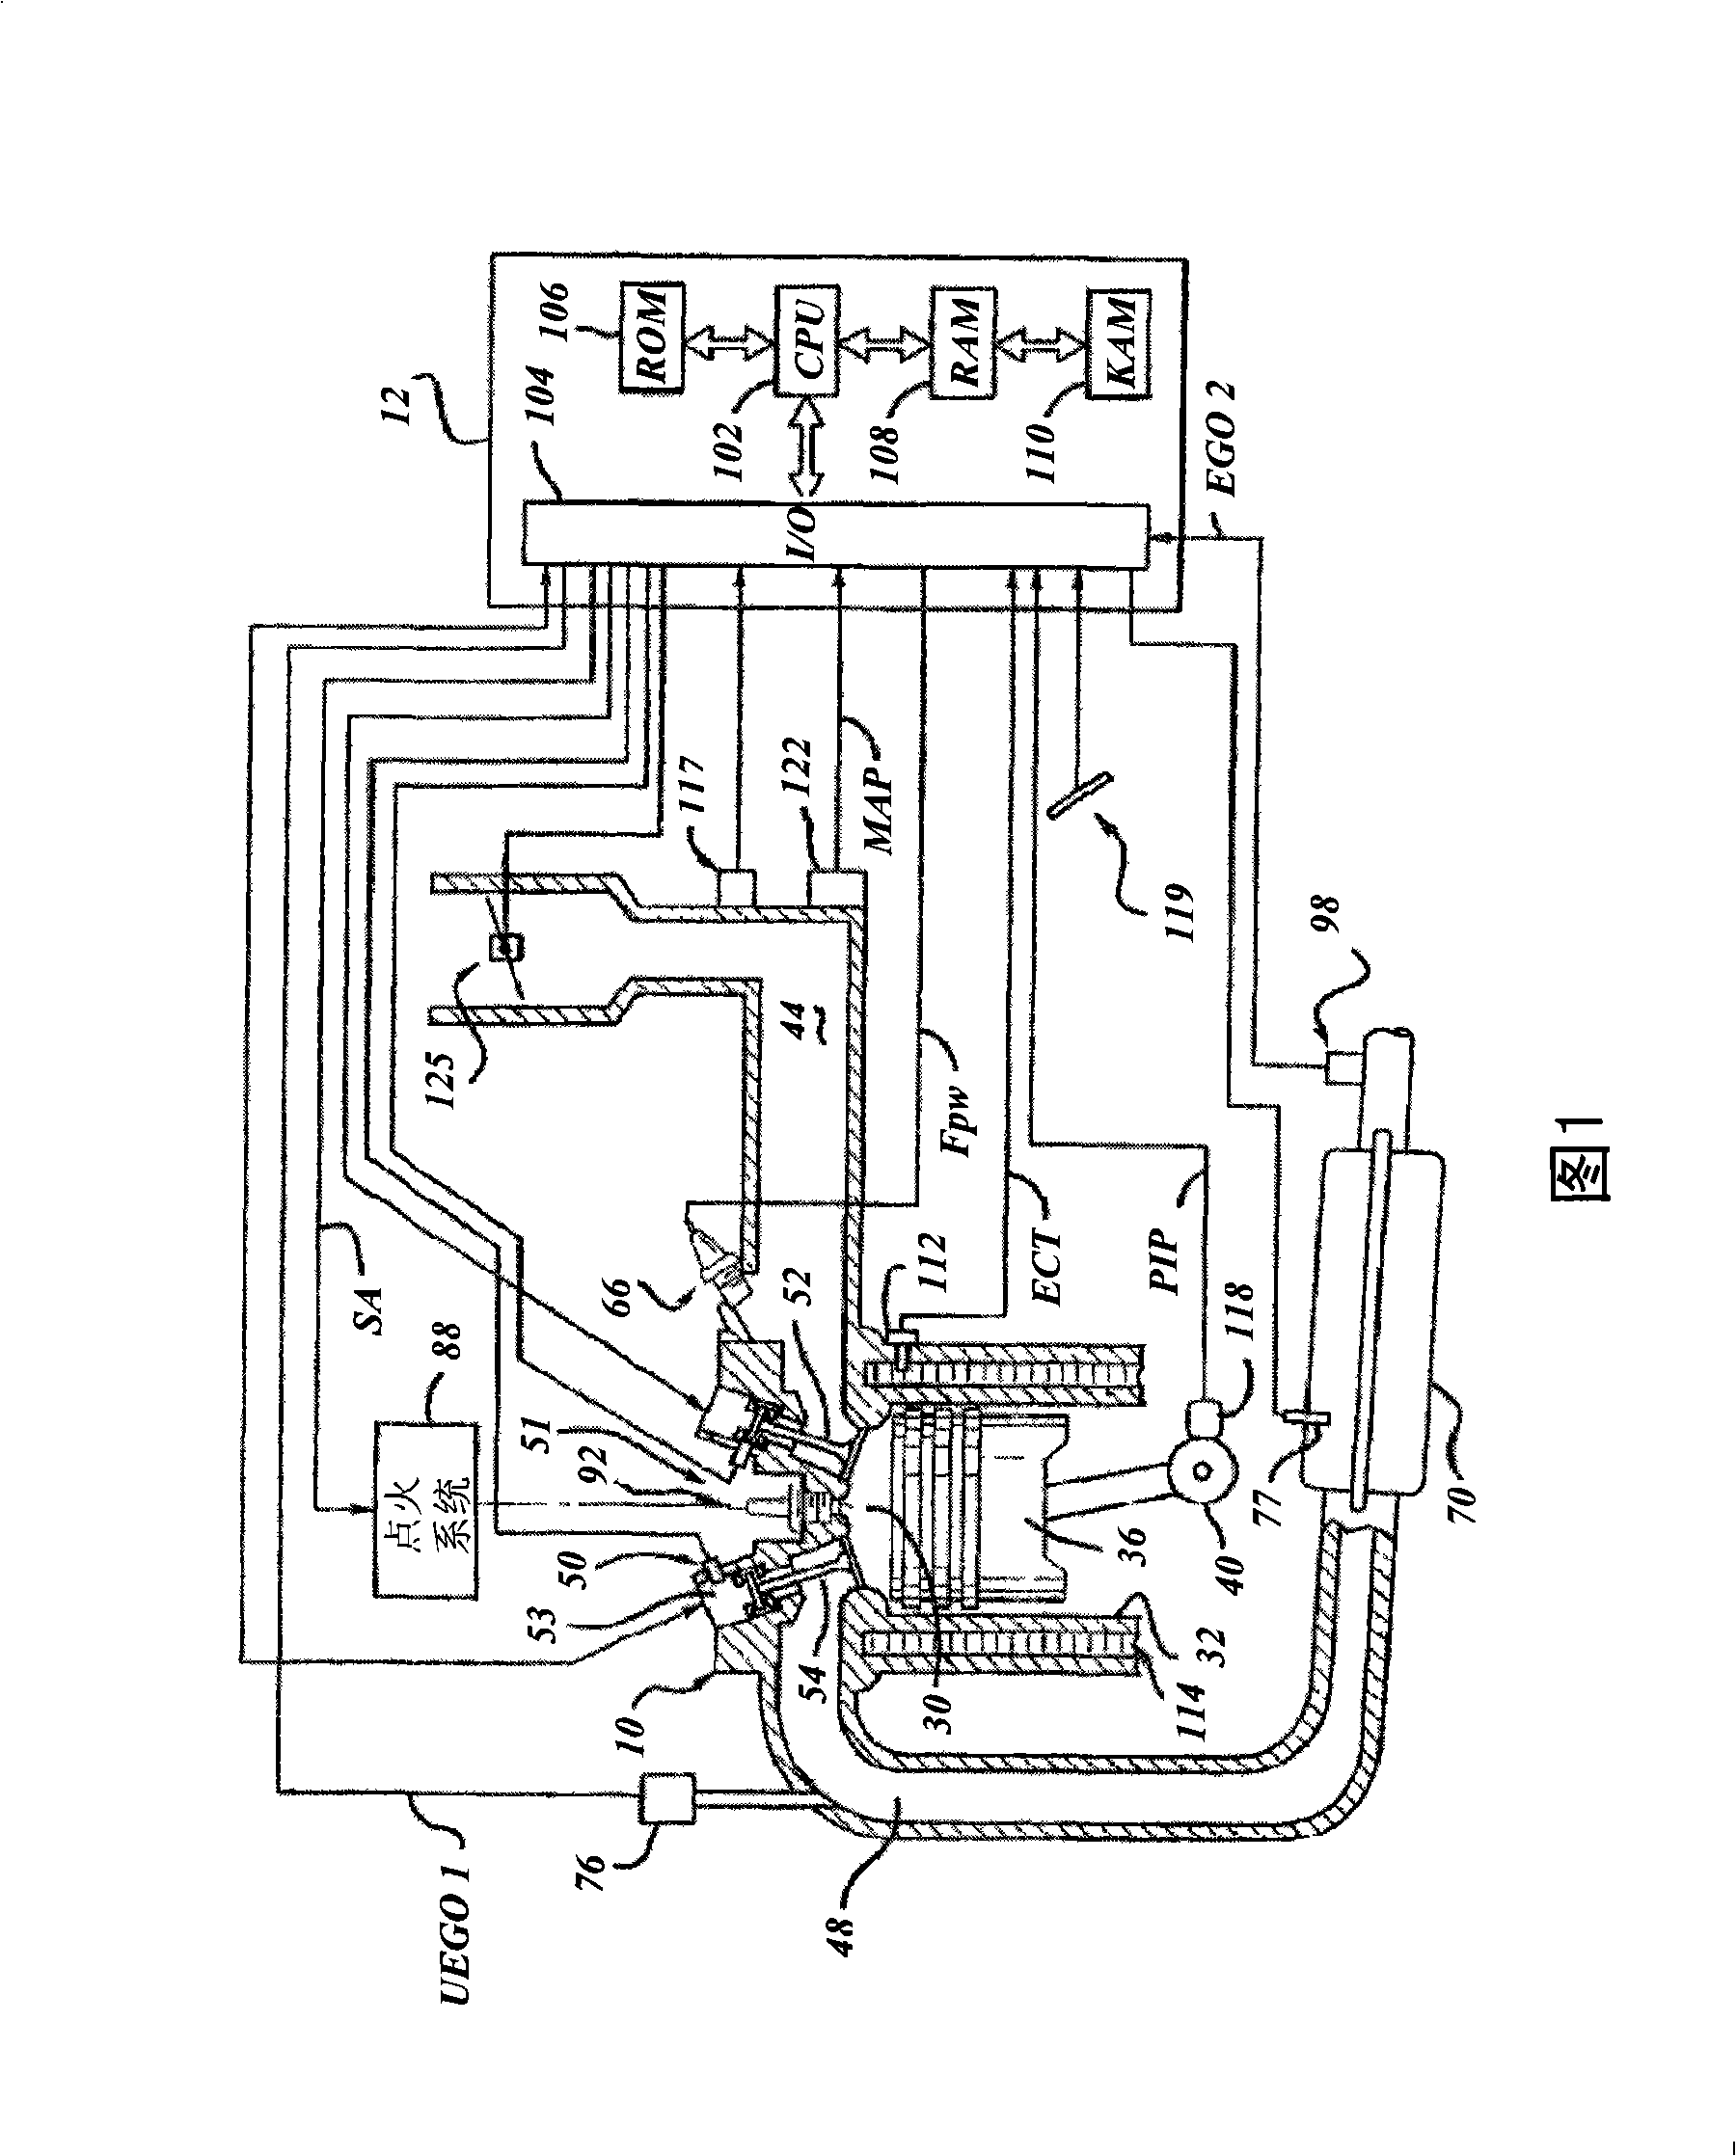 Method for controlling air-fuel ratio for an alternating valve engine